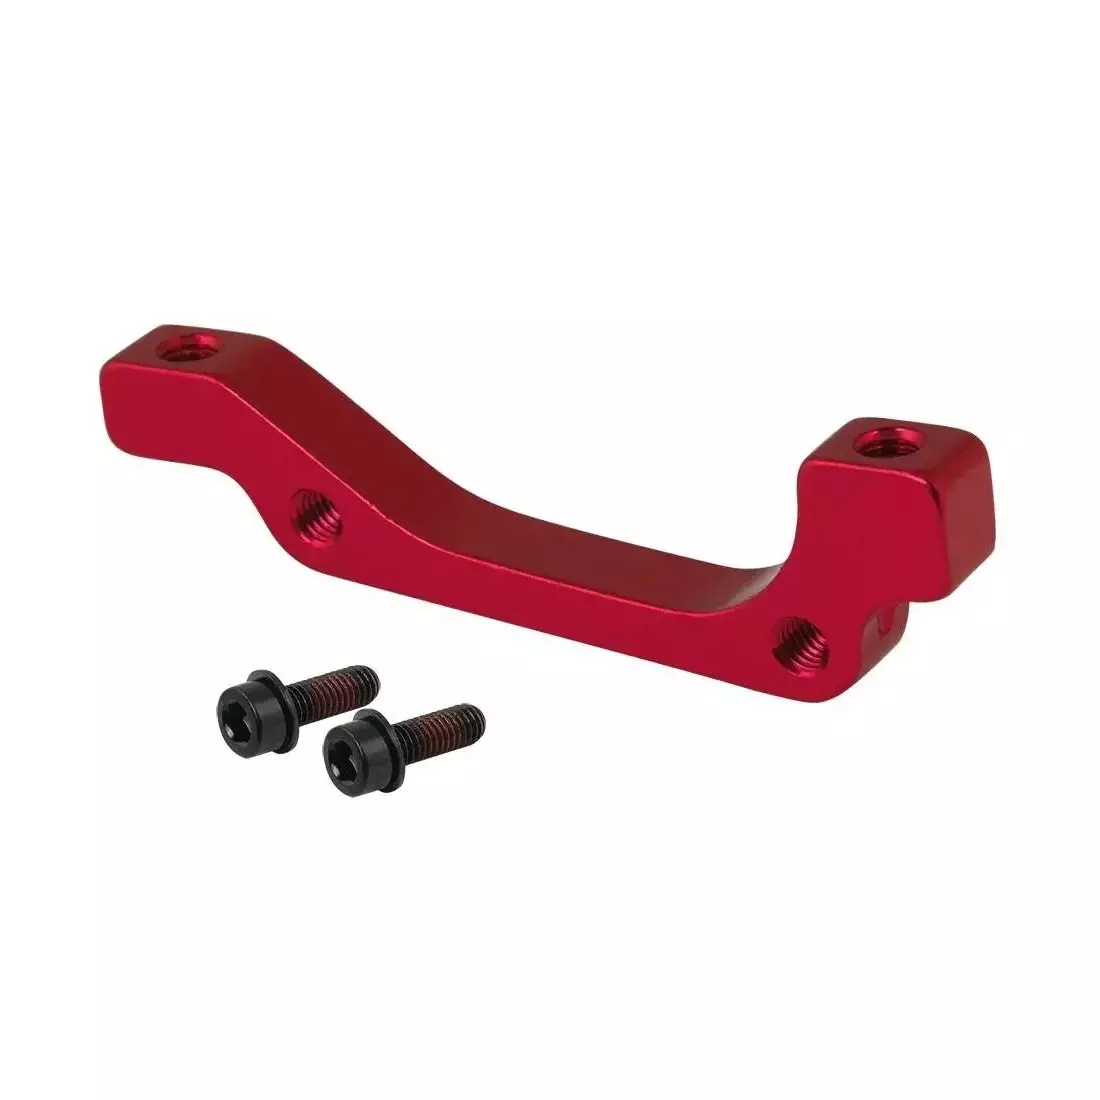 FORCE PM-IS disc brake adapter, 160mm rear, red